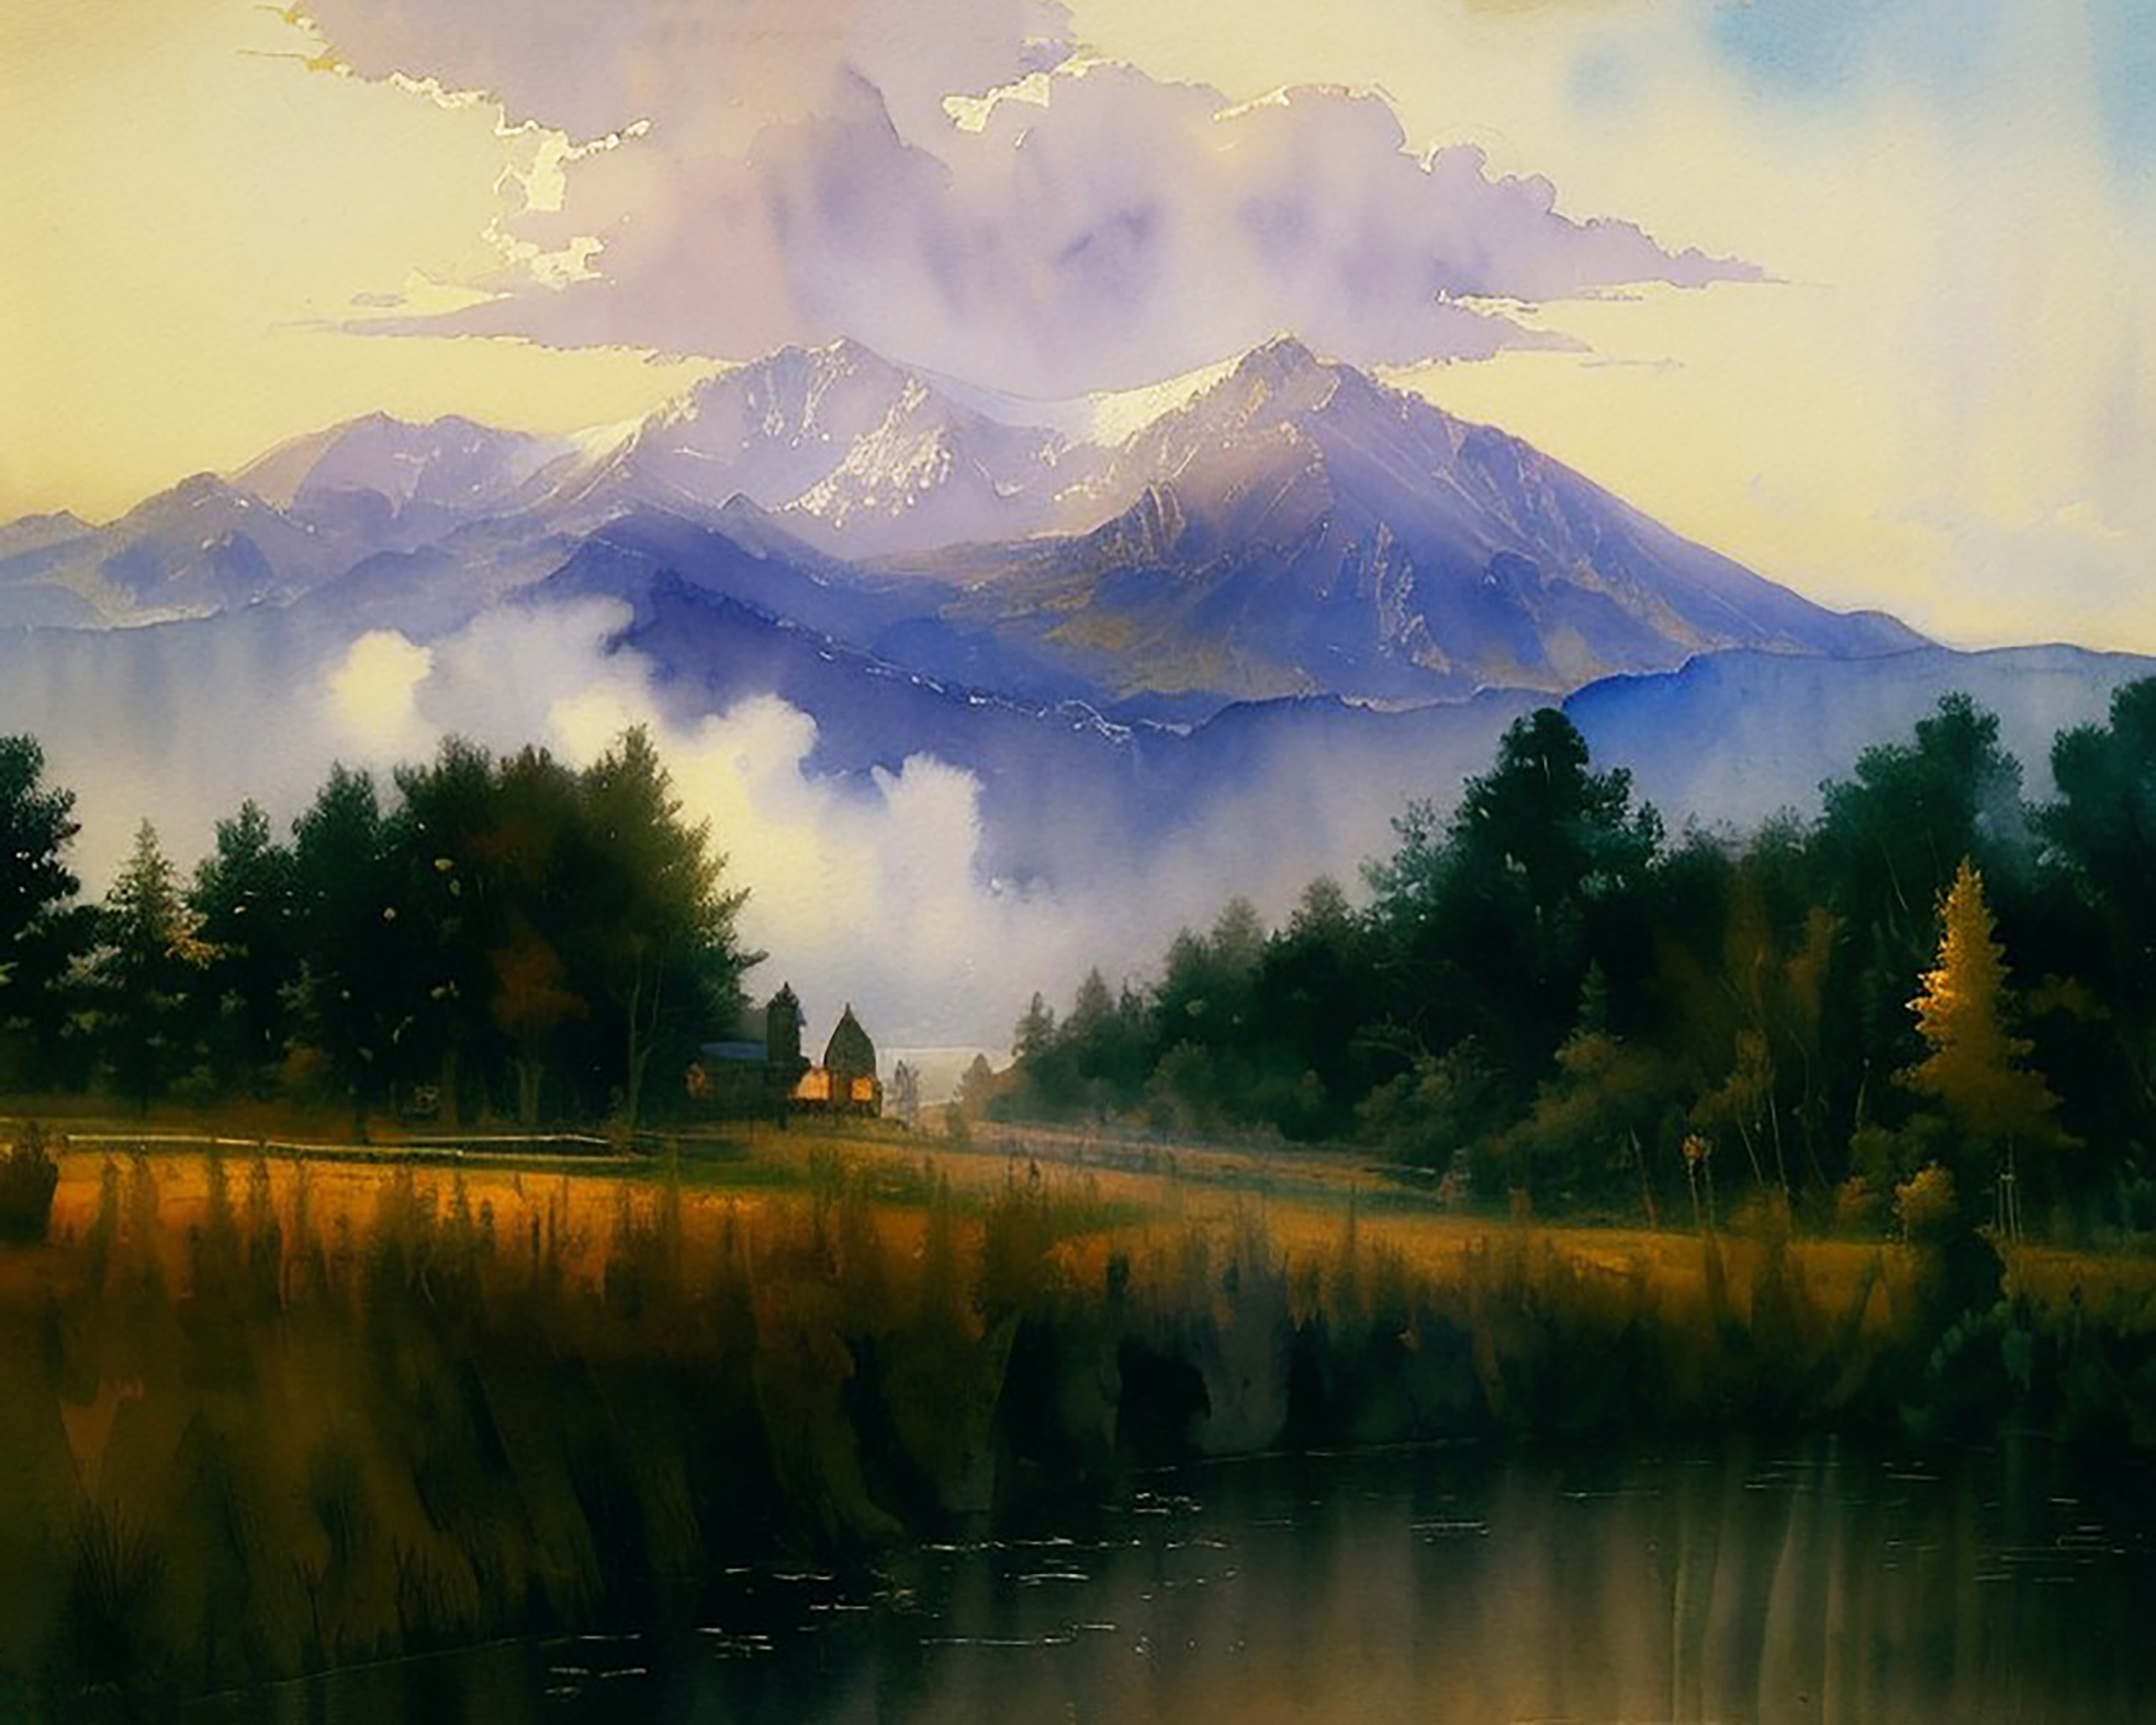 Mount sopris from the pond 8x10 300 bggygp